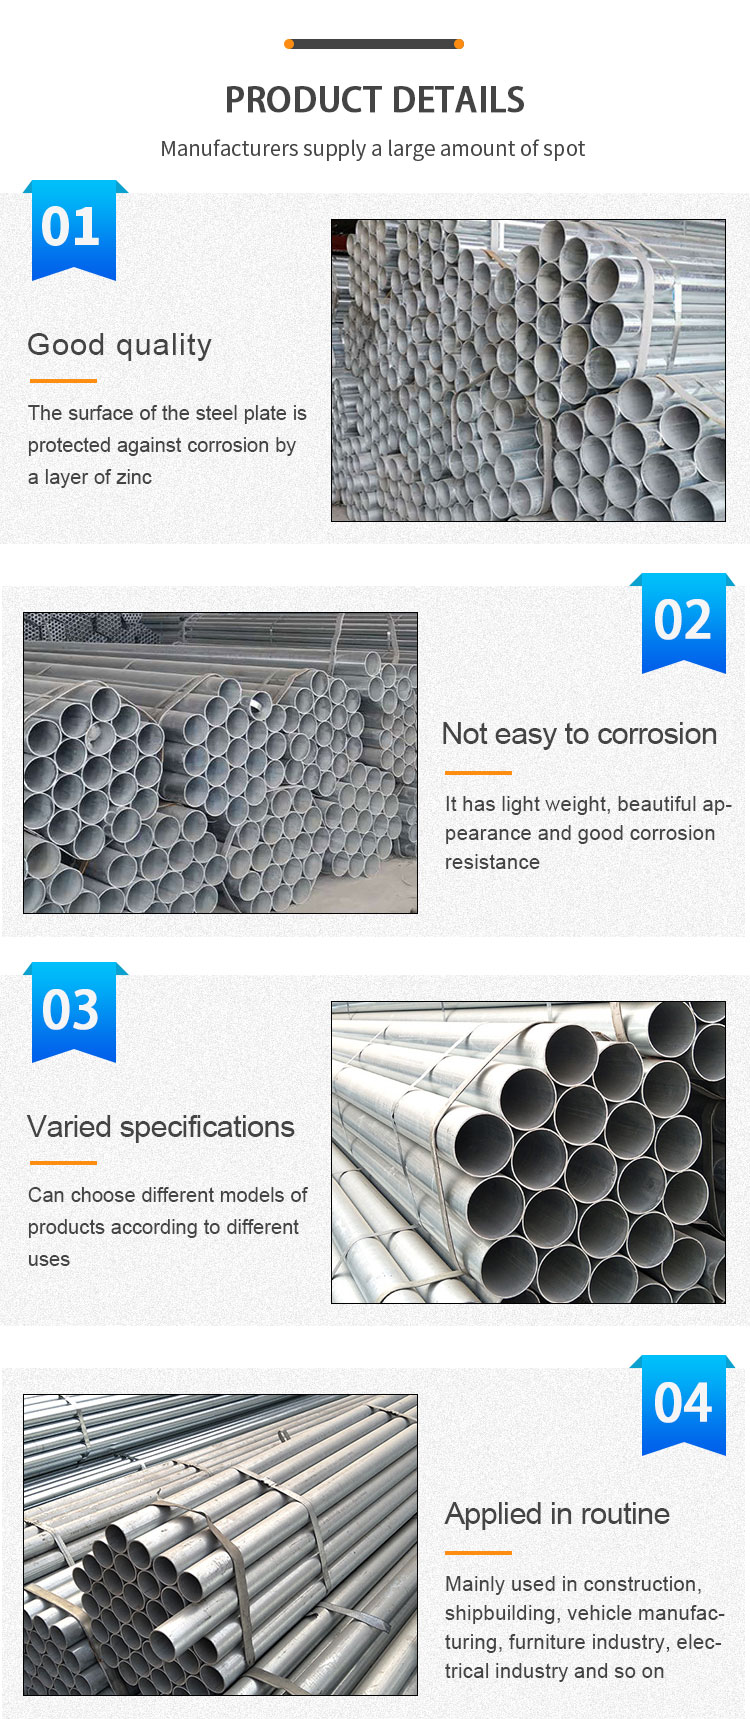 Product Details of Galvanized Pipe 3